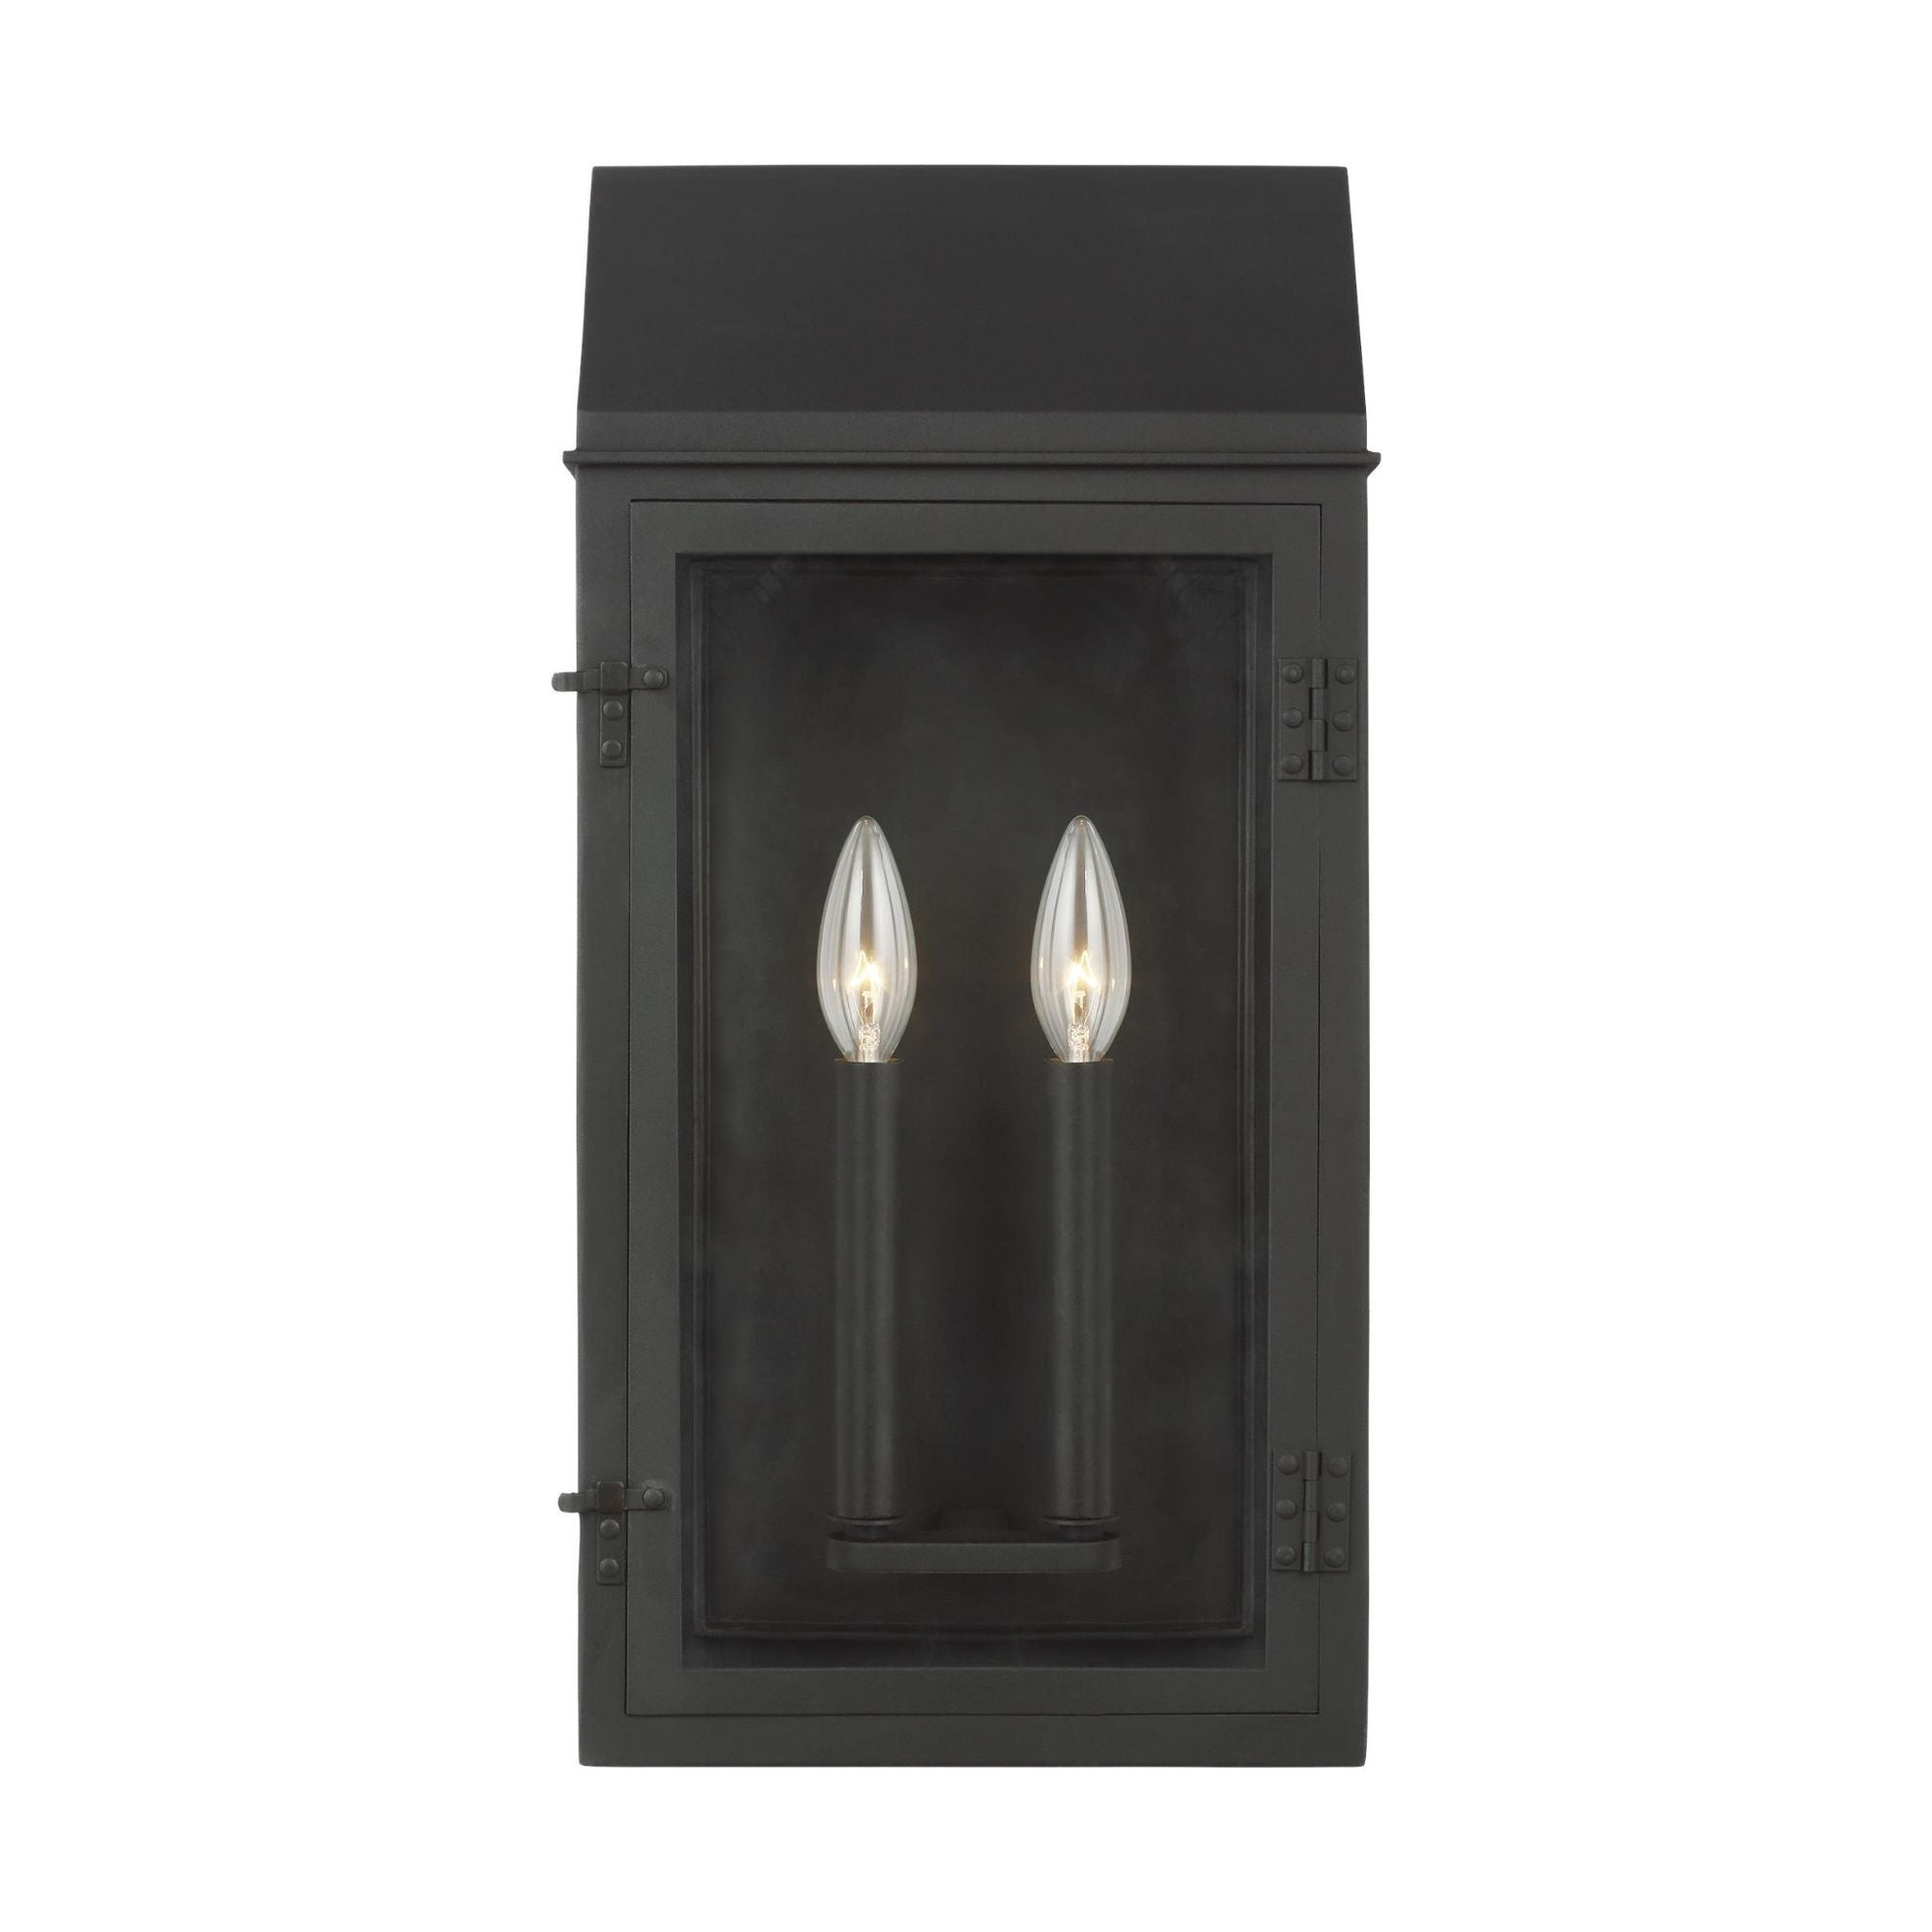 Chapman & Myers Hingham Large Outdoor Wall Lantern in Textured Black